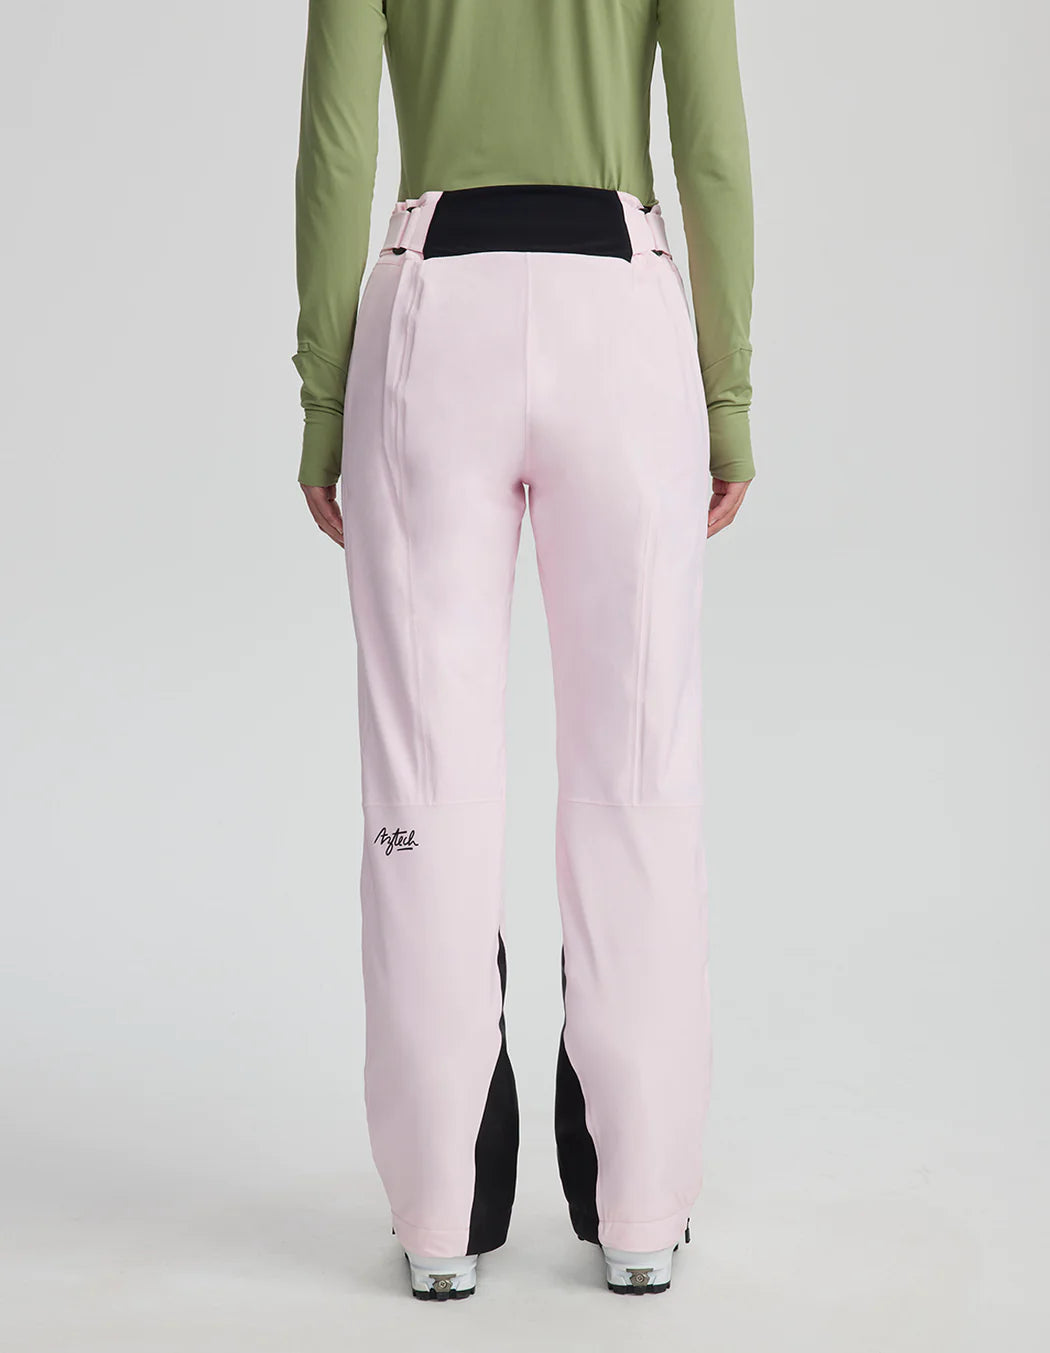 Ski Pants For Women - Polyester - White - Pink - 5 Colors - 3